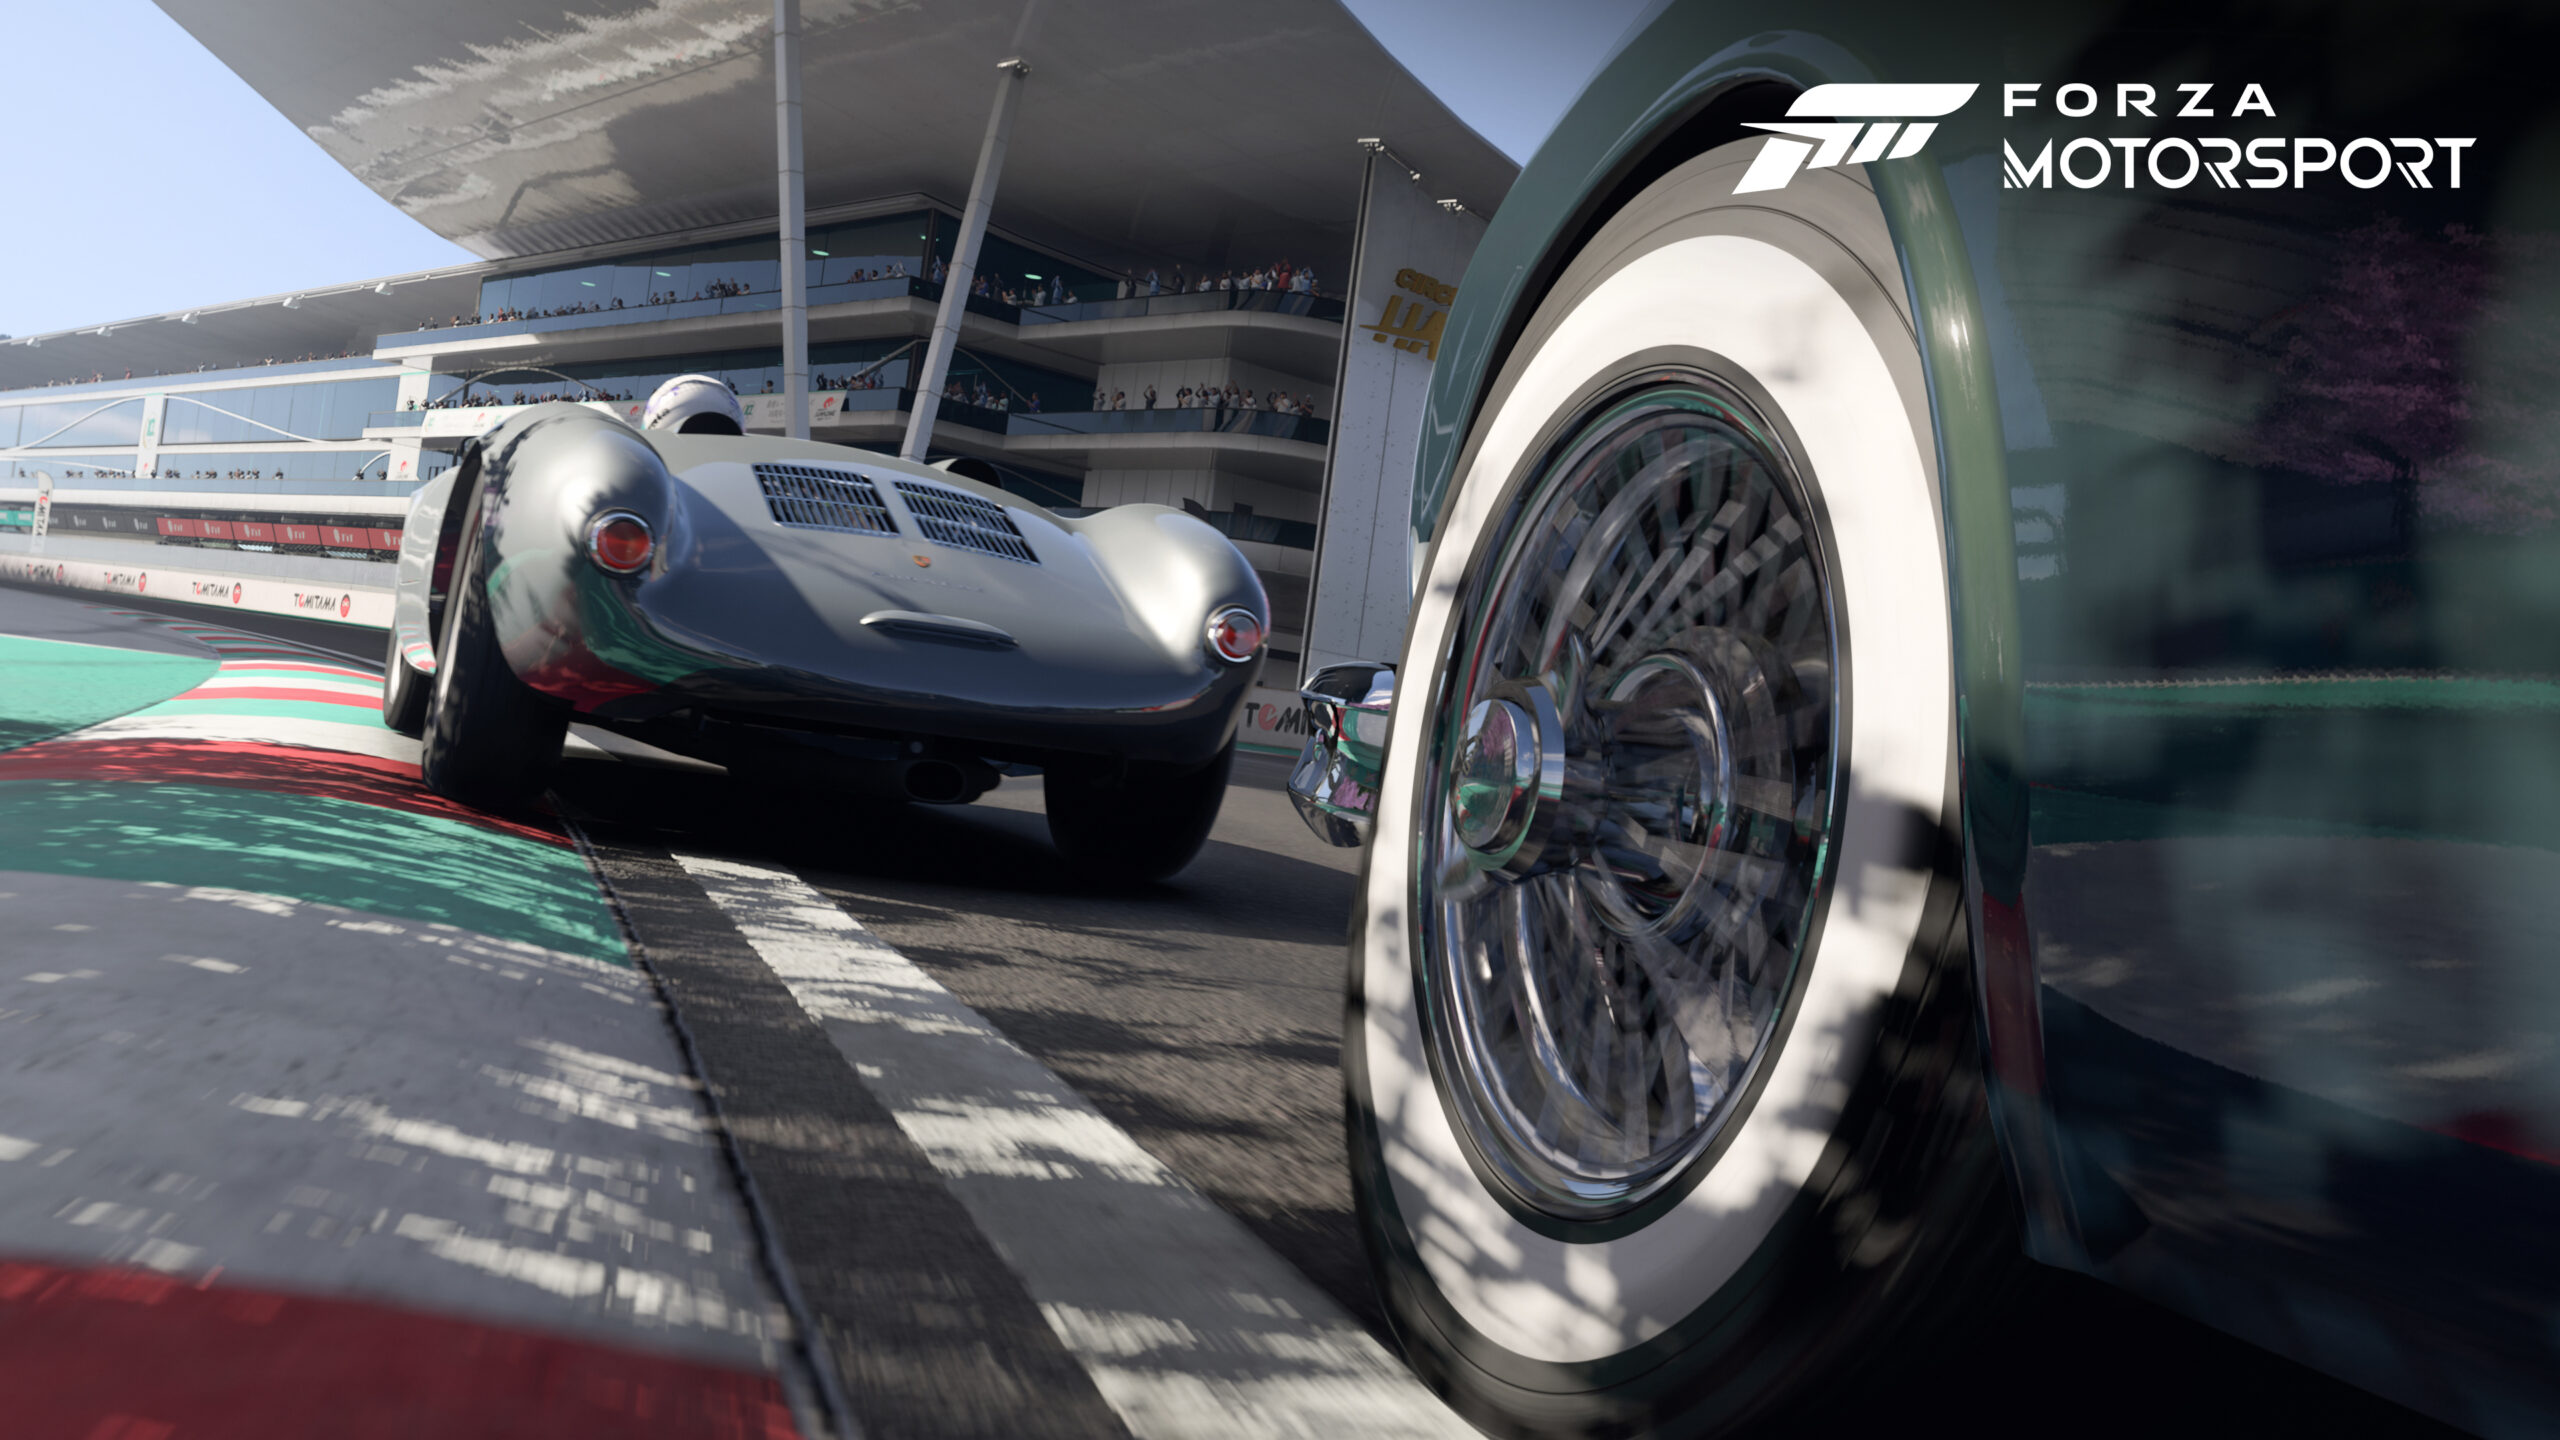 I Played the First Two Hours of Forza Motorsport. Here's What to